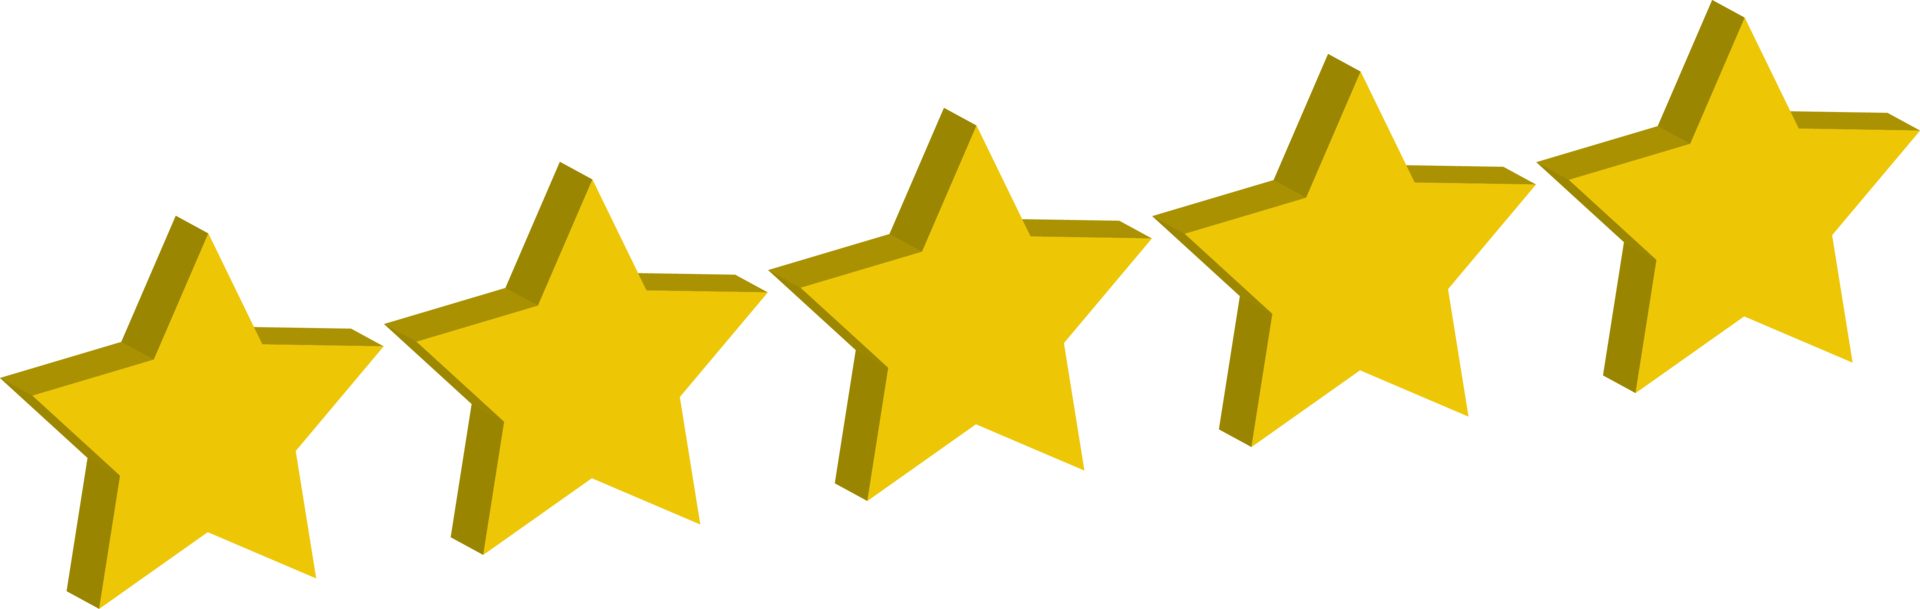 5 stars 3d yellow gold review rating png